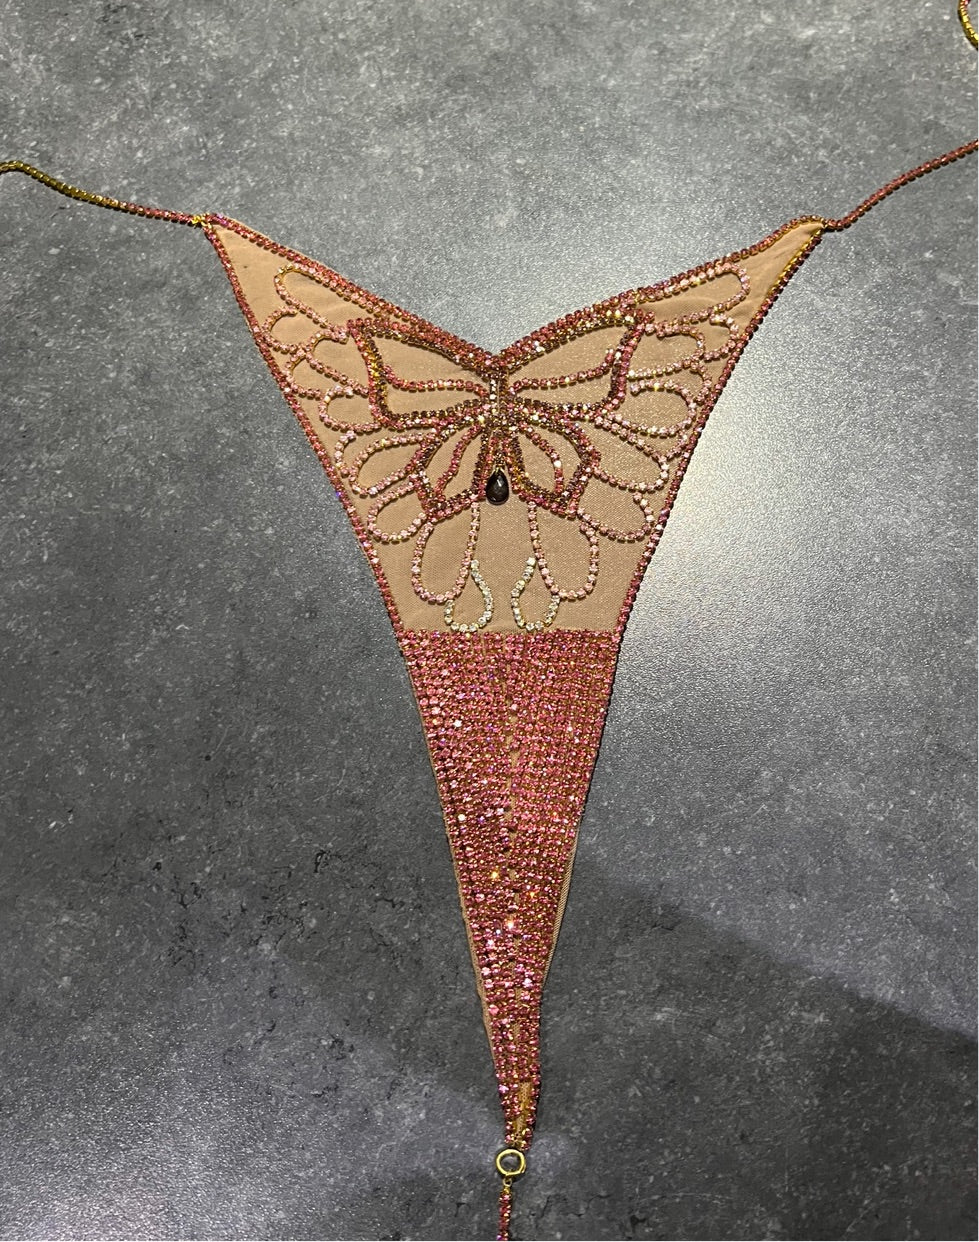 Crystal Thong Butterfly Underwear Chain Jewelry - Exotic - Seek No Approval